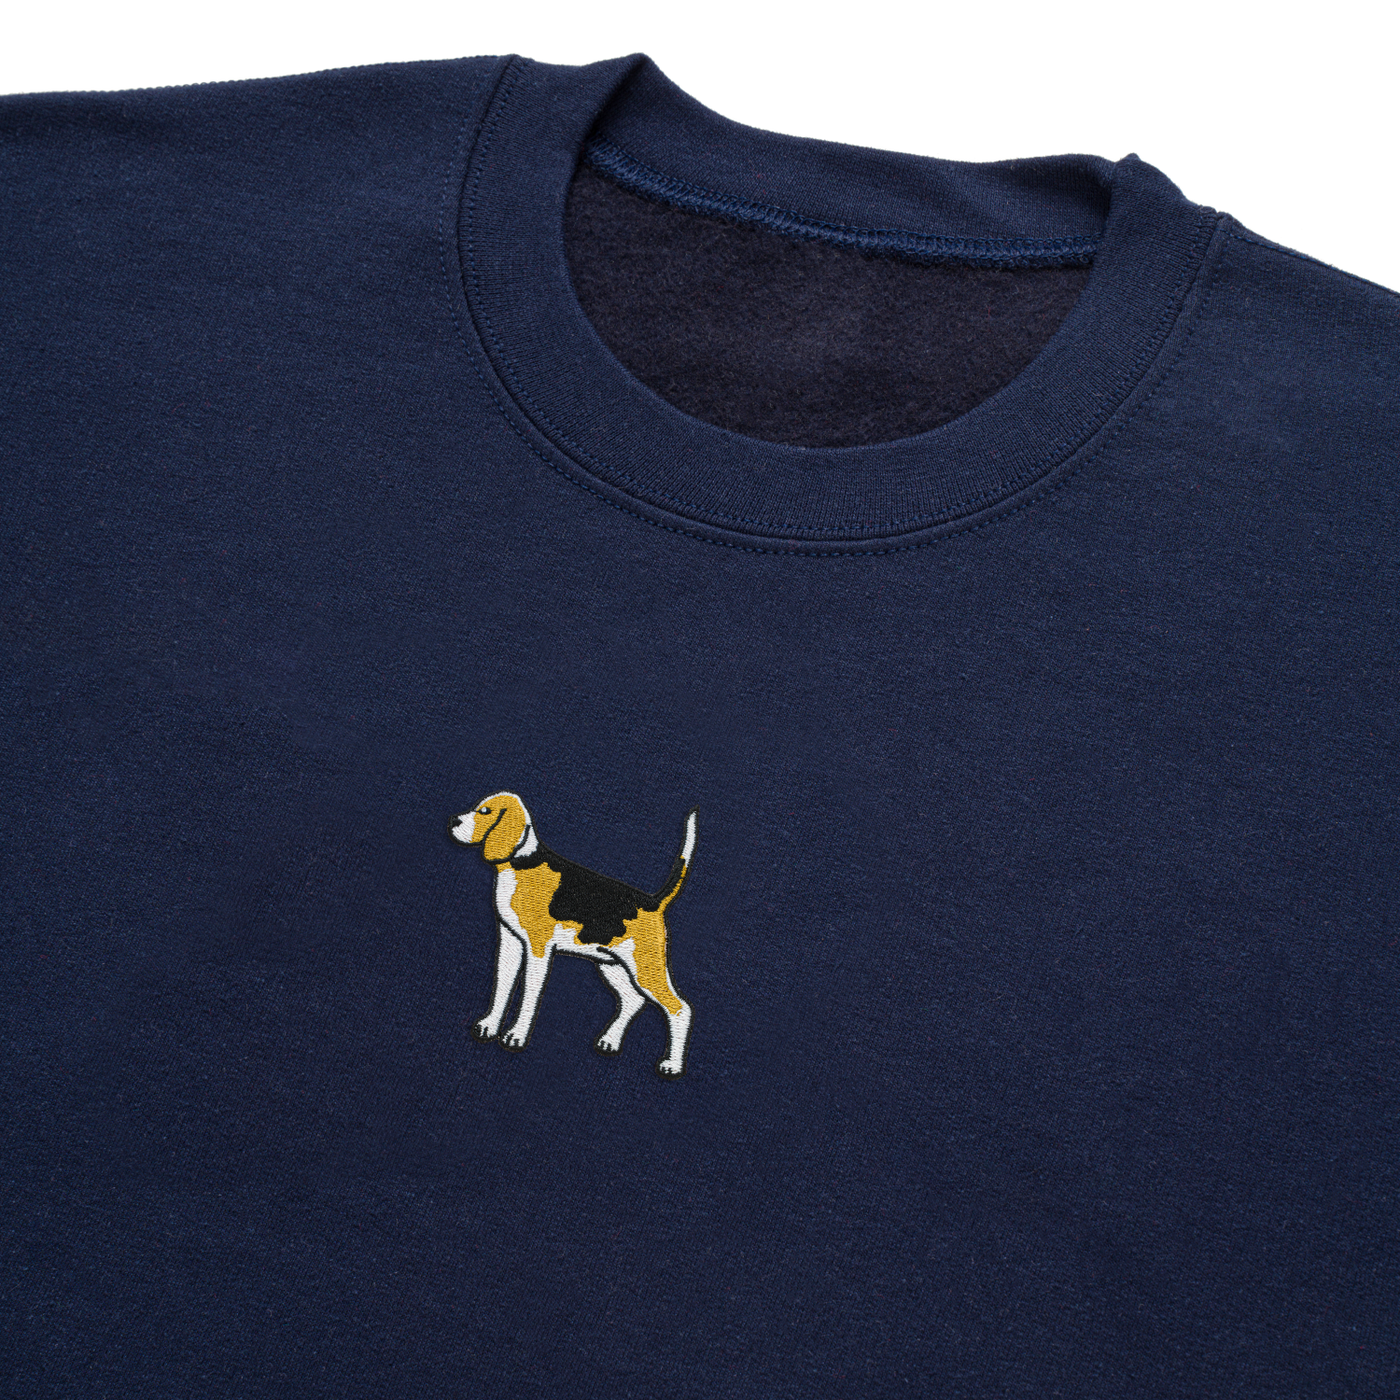 Bobby's Planet Men's Embroidered Beagle Sweatshirt from Paws Dog Cat Animals Collection in Navy Color#color_navy